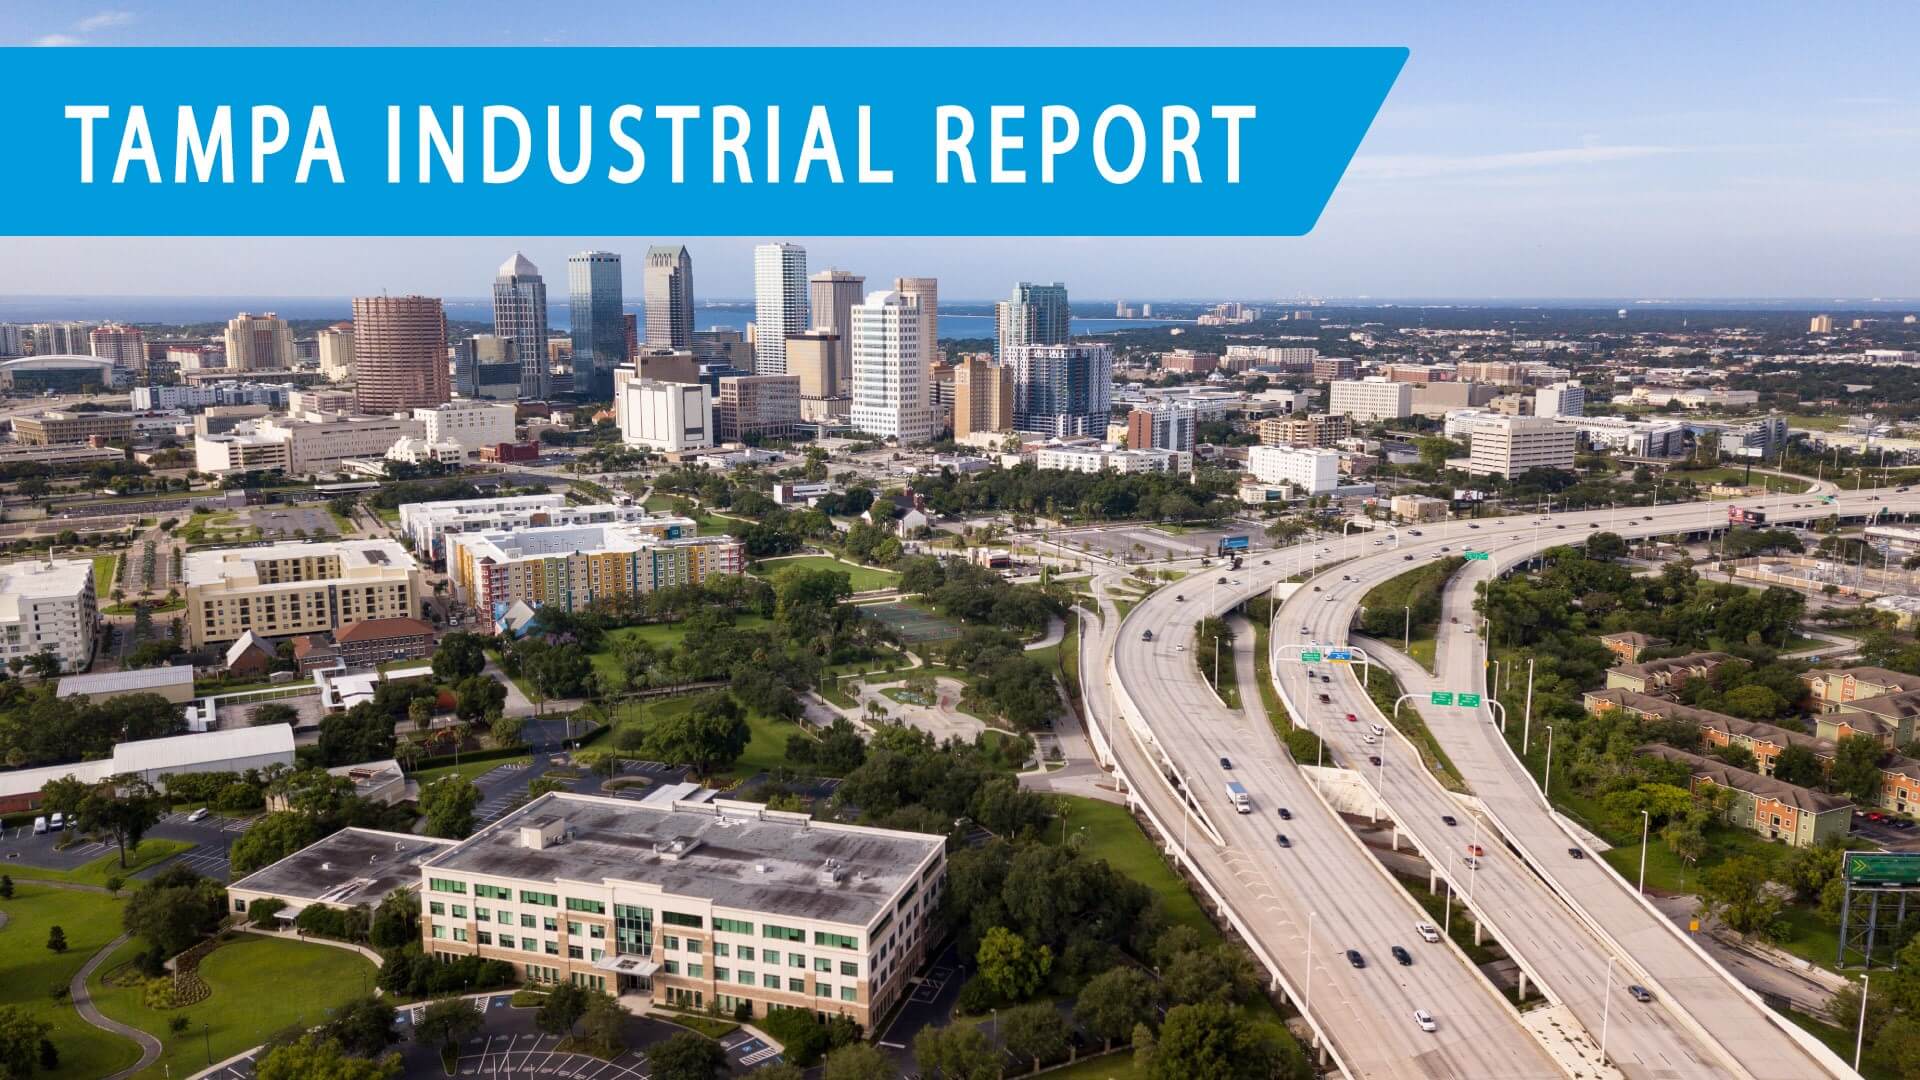 Tampa Commercial Real Estate Industrial Report